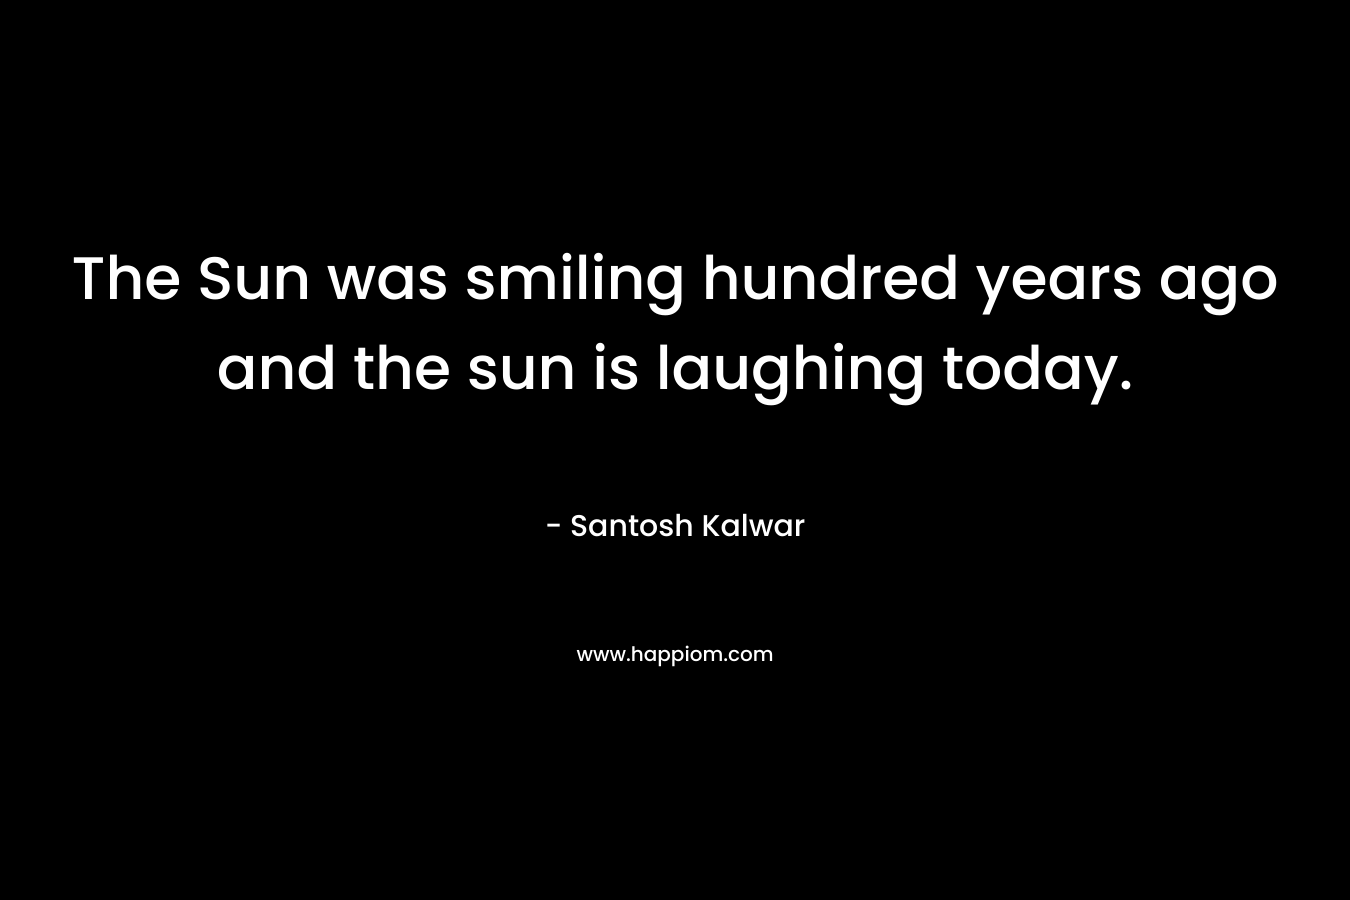 The Sun was smiling hundred years ago and the sun is laughing today.